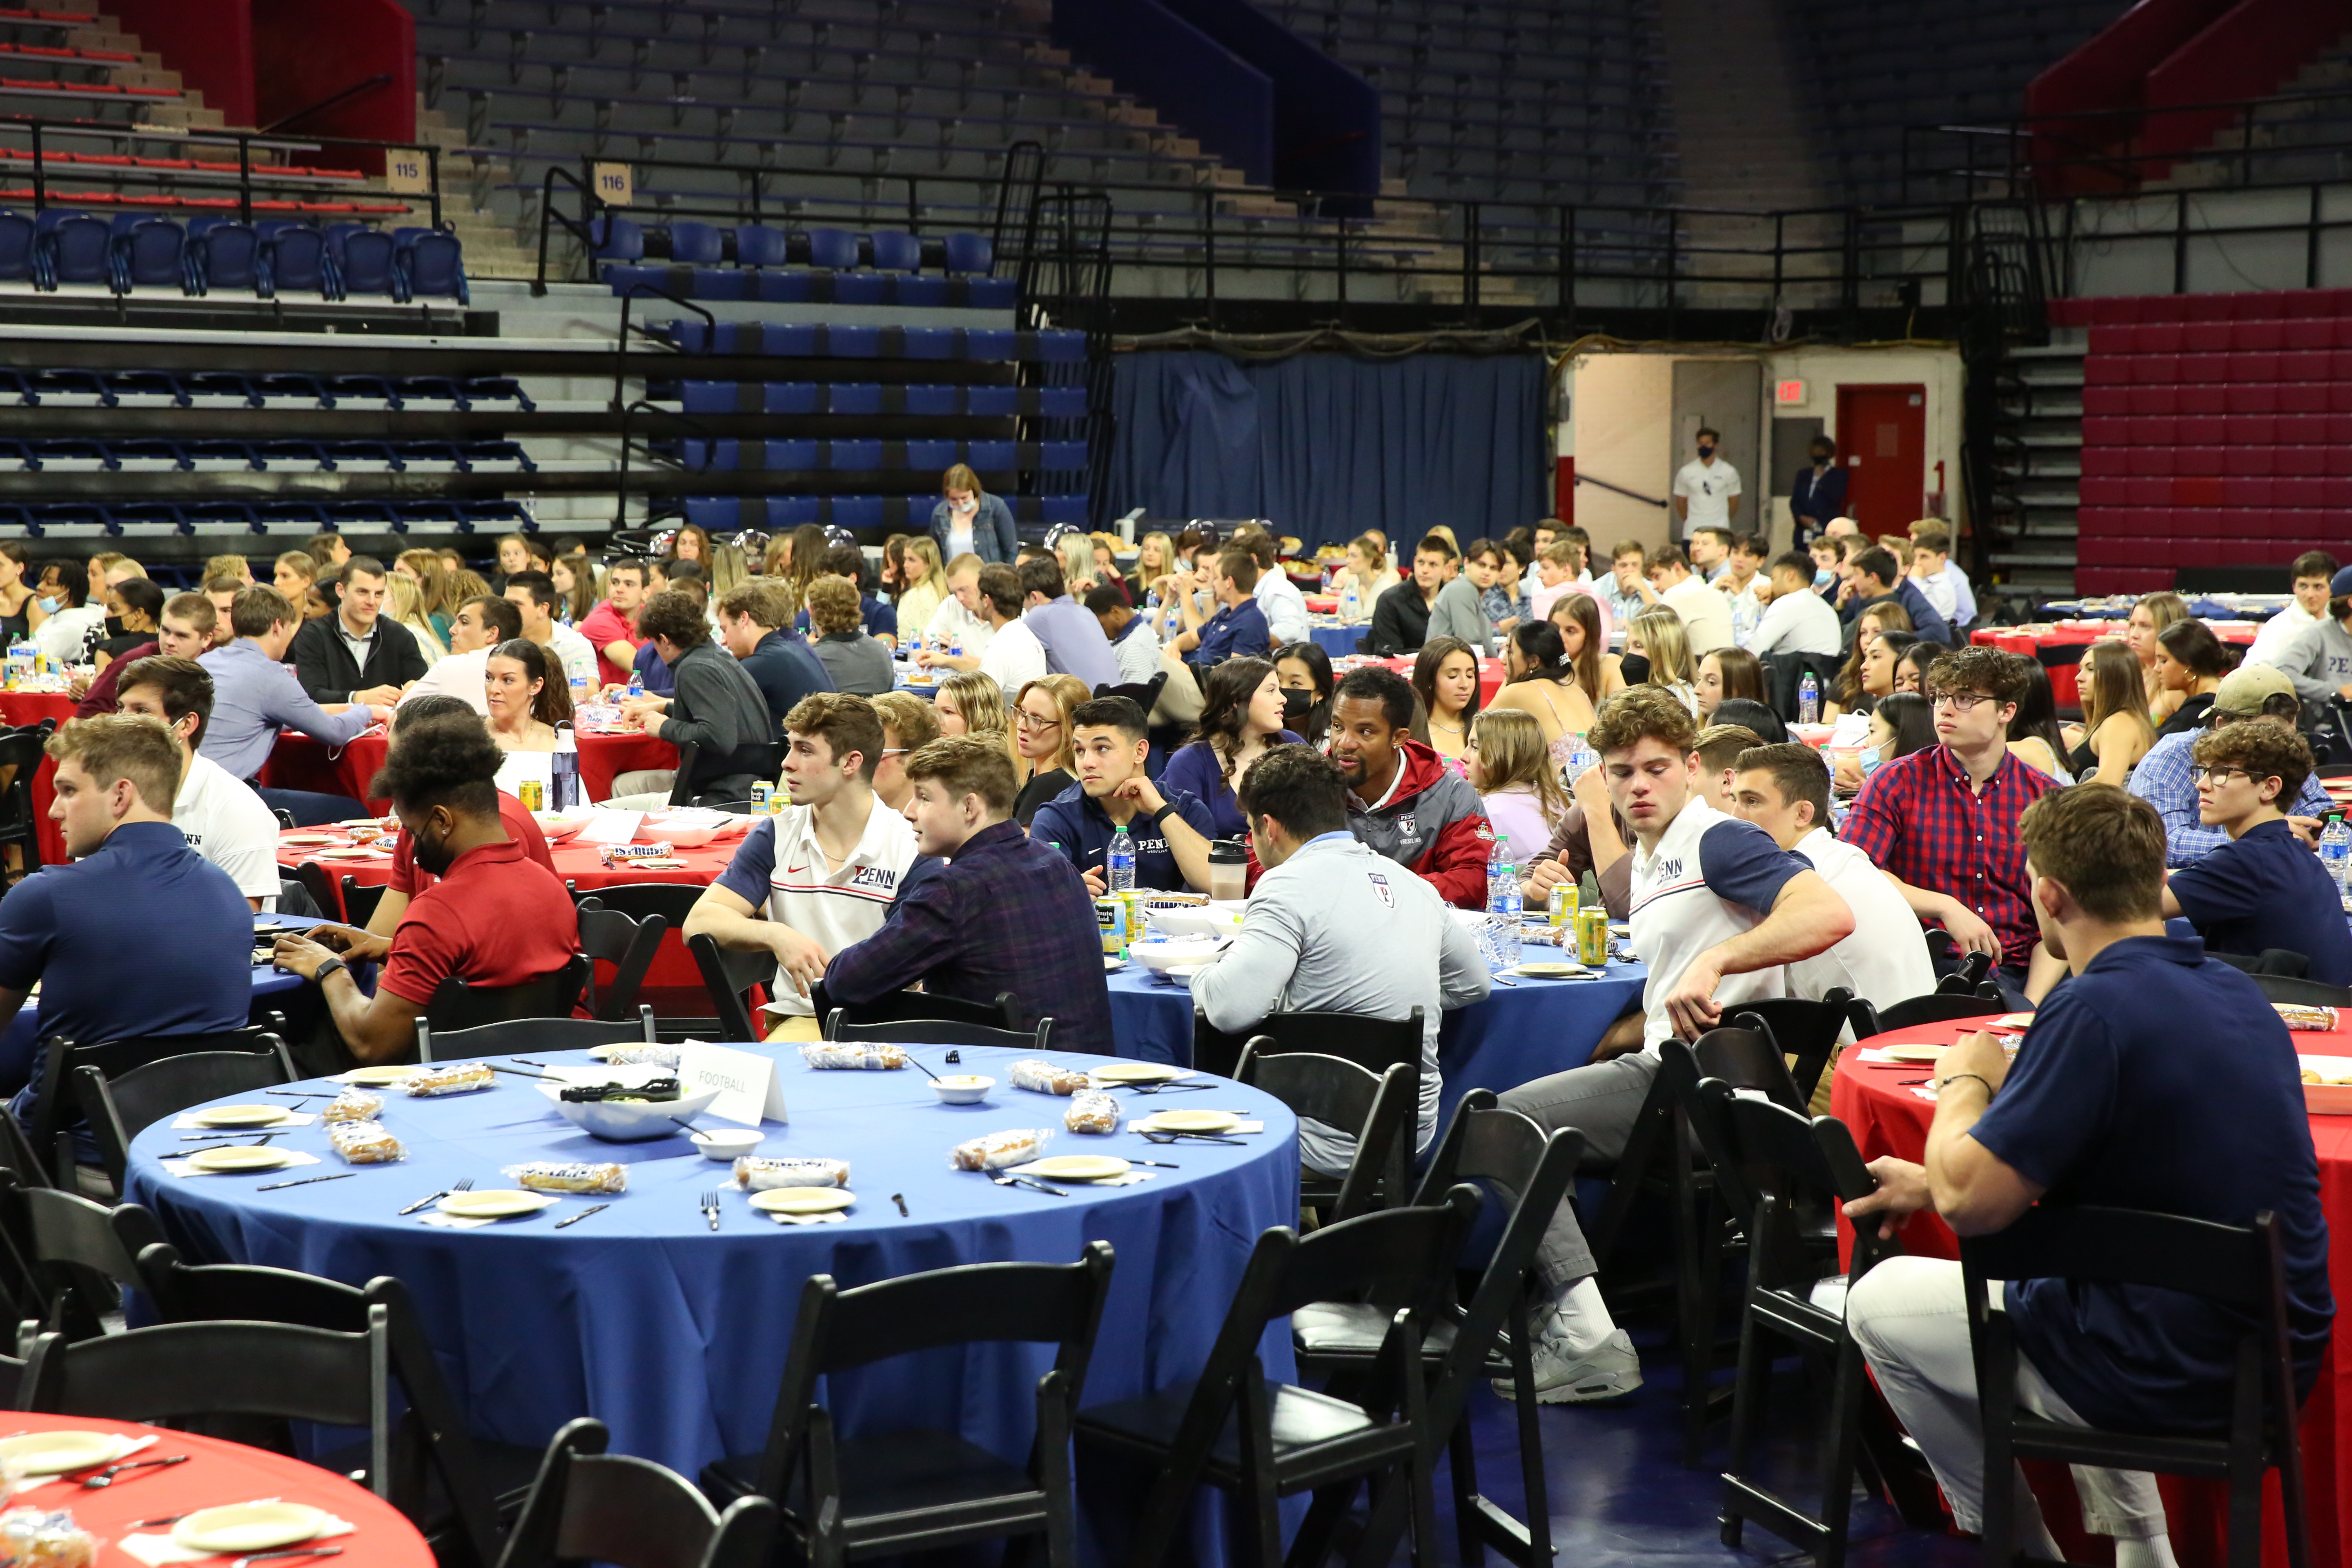 Attendees sit at tables on the Palestra floor during the awards ceremony.